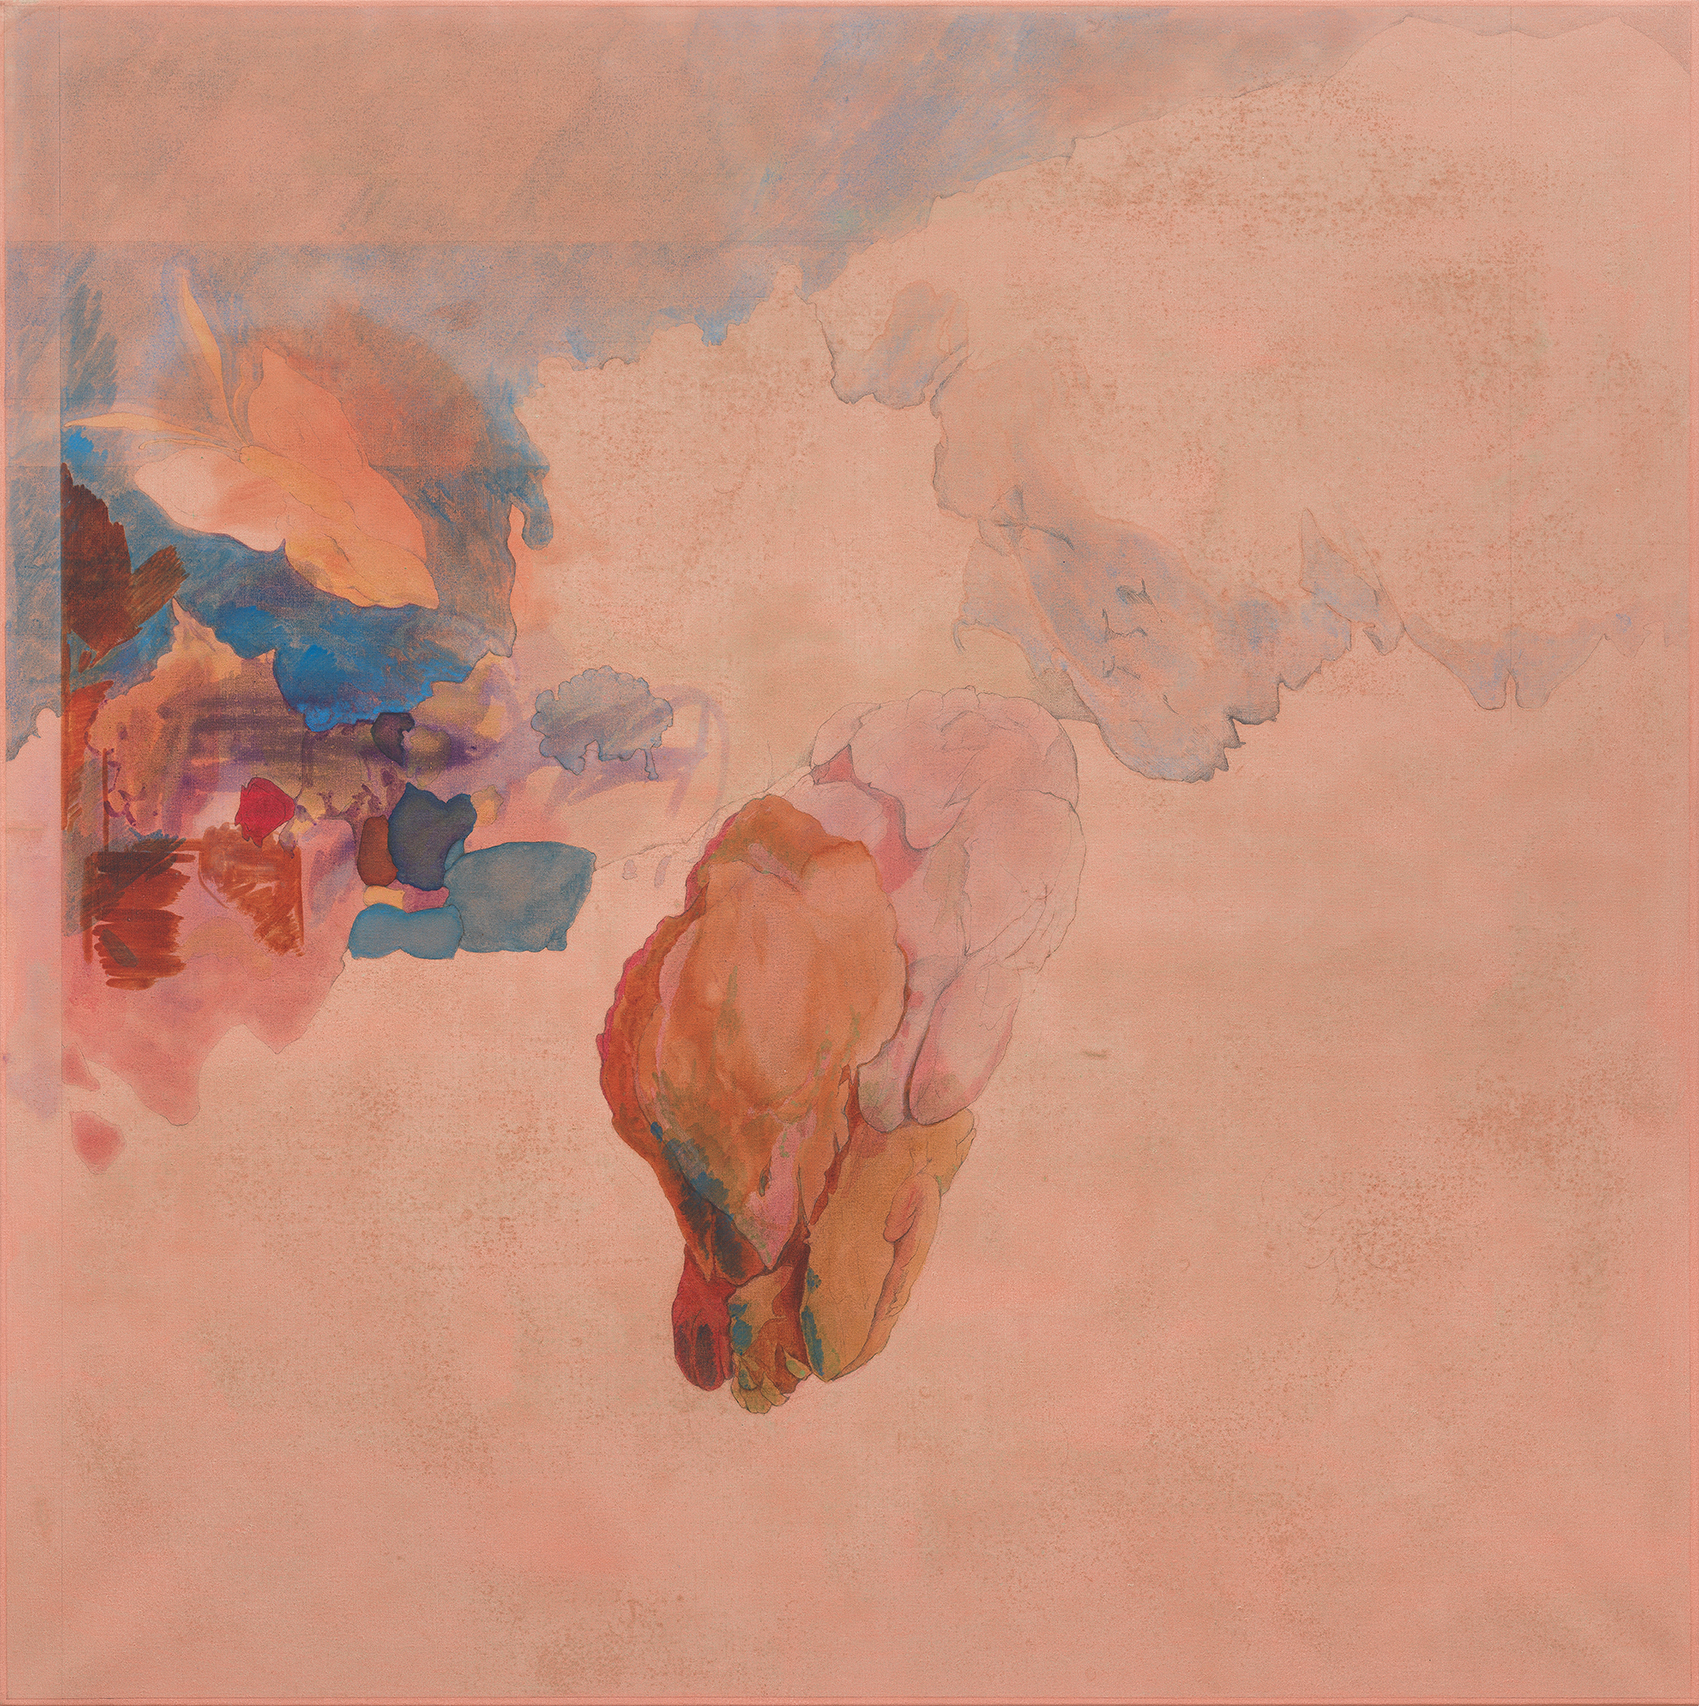 Dustin Hodges LEP_25, 2018 oil and graphite on linen 60 x 60 in. (152.4 x 152.4 cm.)